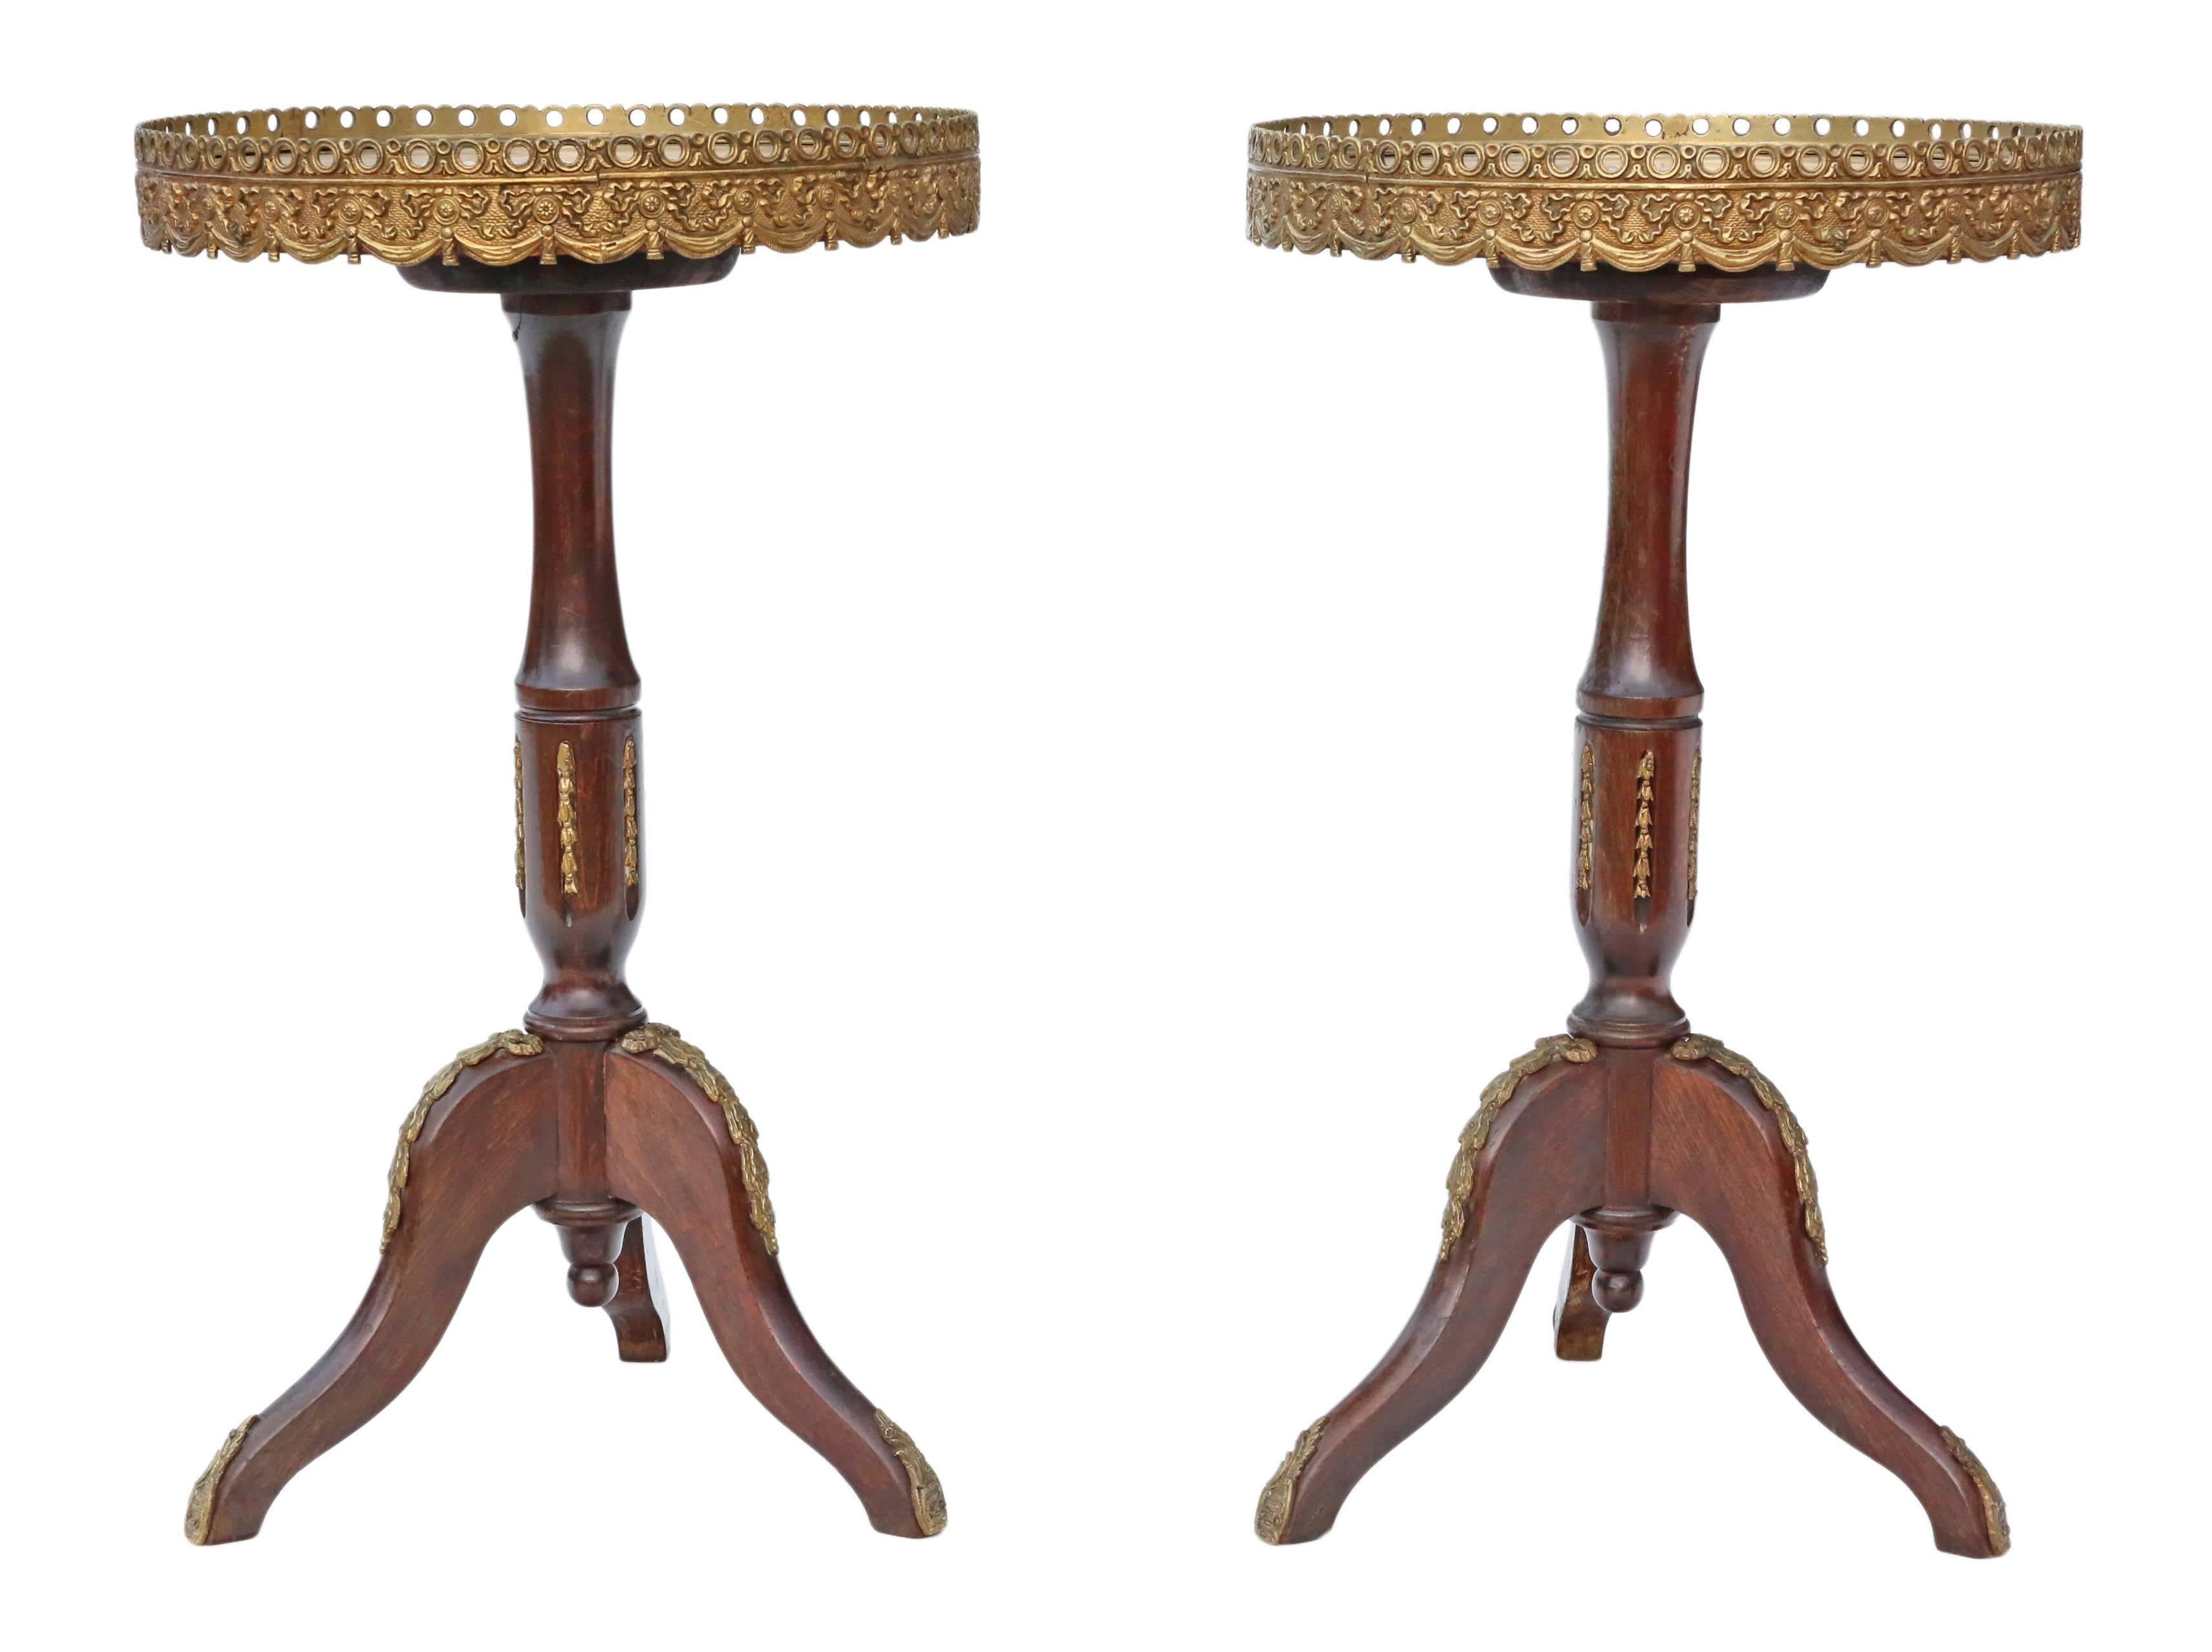 Antique pair of Georgian/Regency Revival beech and marble wine or side tables. Date from the mid-20th century.

Solid and strong with no loose joints. Full of age, character and charm. Very decorative with loads of ormolu (gold on brass/bronze)